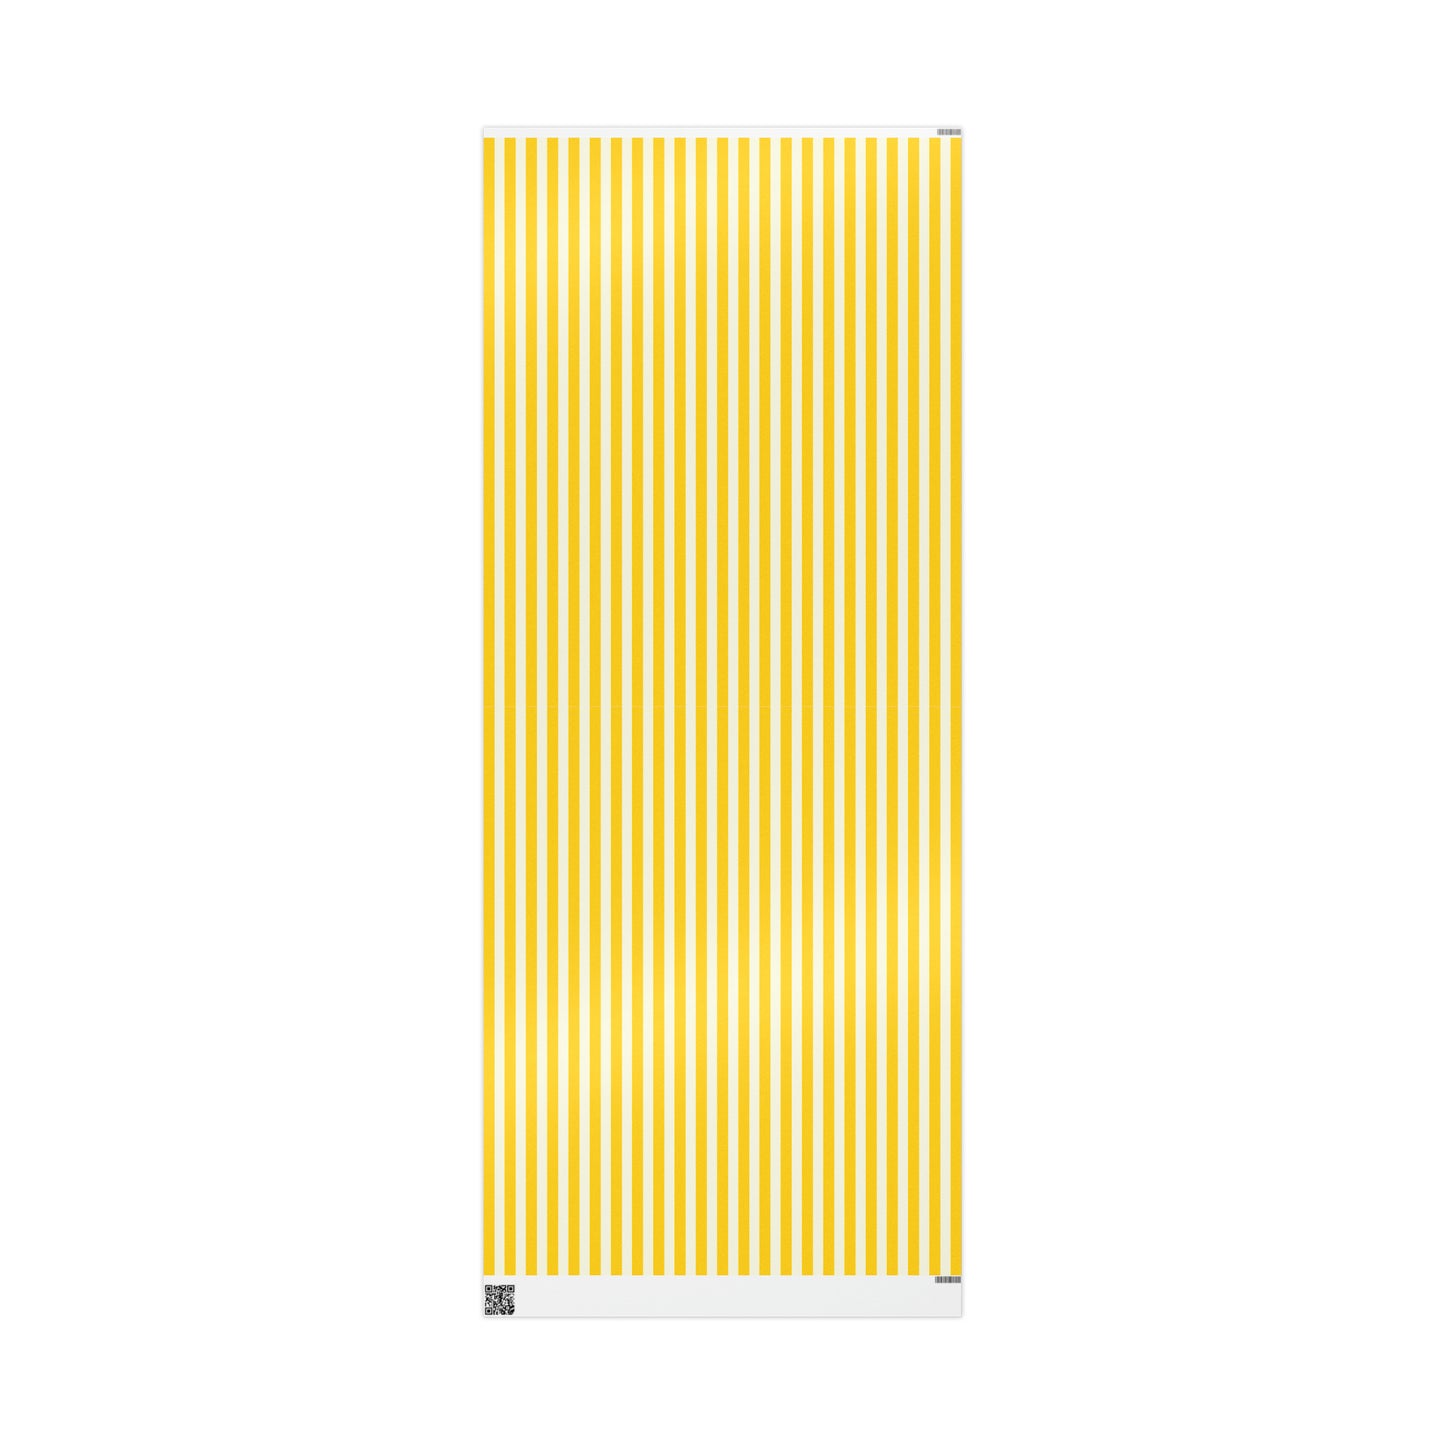 Lemony Yellow Stripes Wrapping Paper Roll (3 sizes)